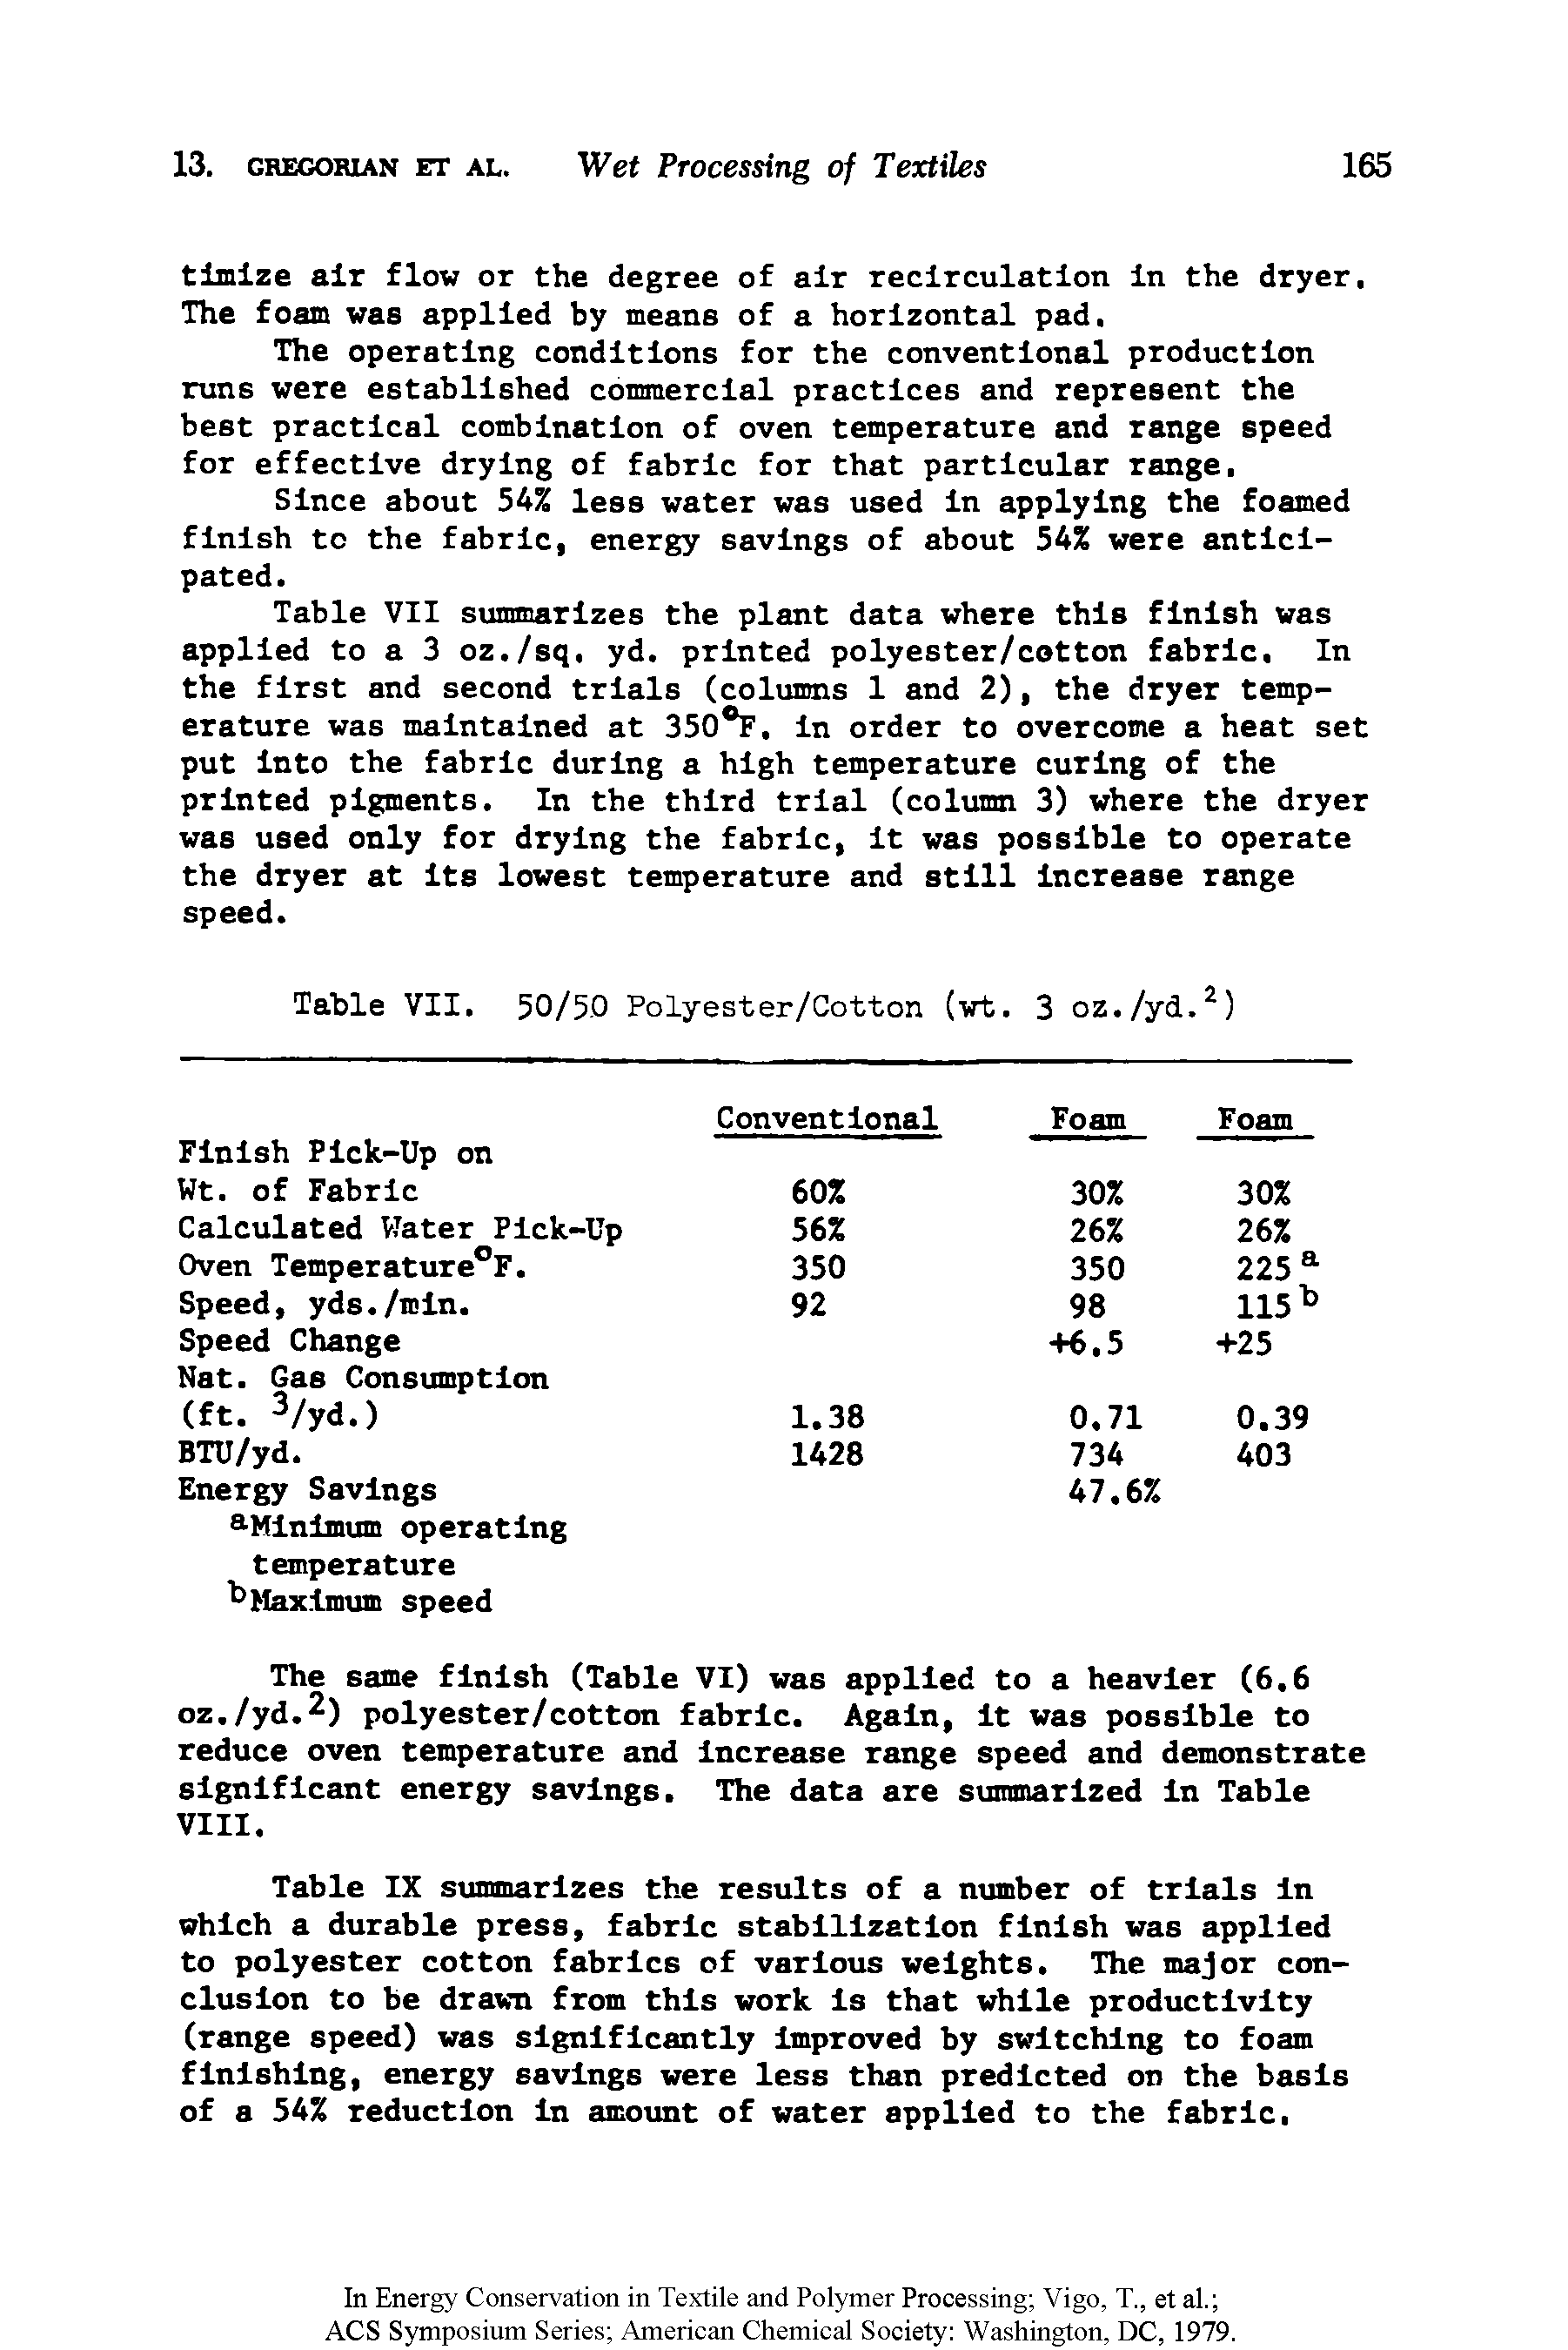 Table VII summarizes the plant data where this finish was applied to a 3 oz./sq, yd. printed polyester/cotton fabric. In the first and second trials (columns 1 and 2), the dryer temperature was maintained at 350°F. in order to overcome a heat set put into the fabric during a high temperature curing of the printed pigments. In the third trial (column 3) where the dryer was used only for drying the fabric, it was possible to operate the dryer at its lowest temperature and still increase range speed.